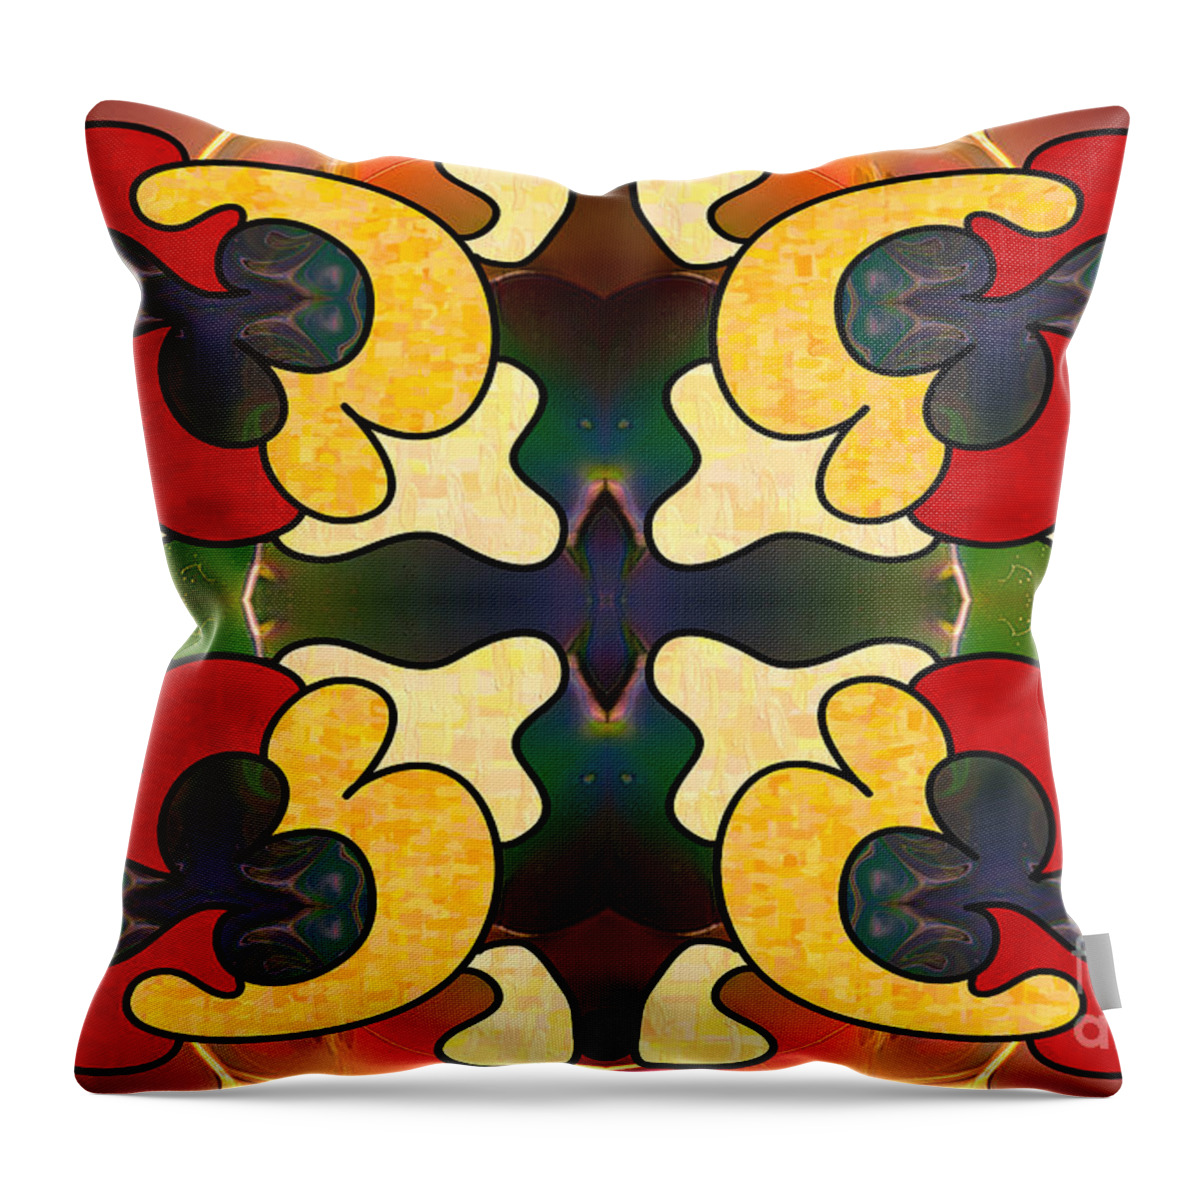 2015 Throw Pillow featuring the digital art MultiDimensional Directions Abstract Art by Omashte by Omaste Witkowski